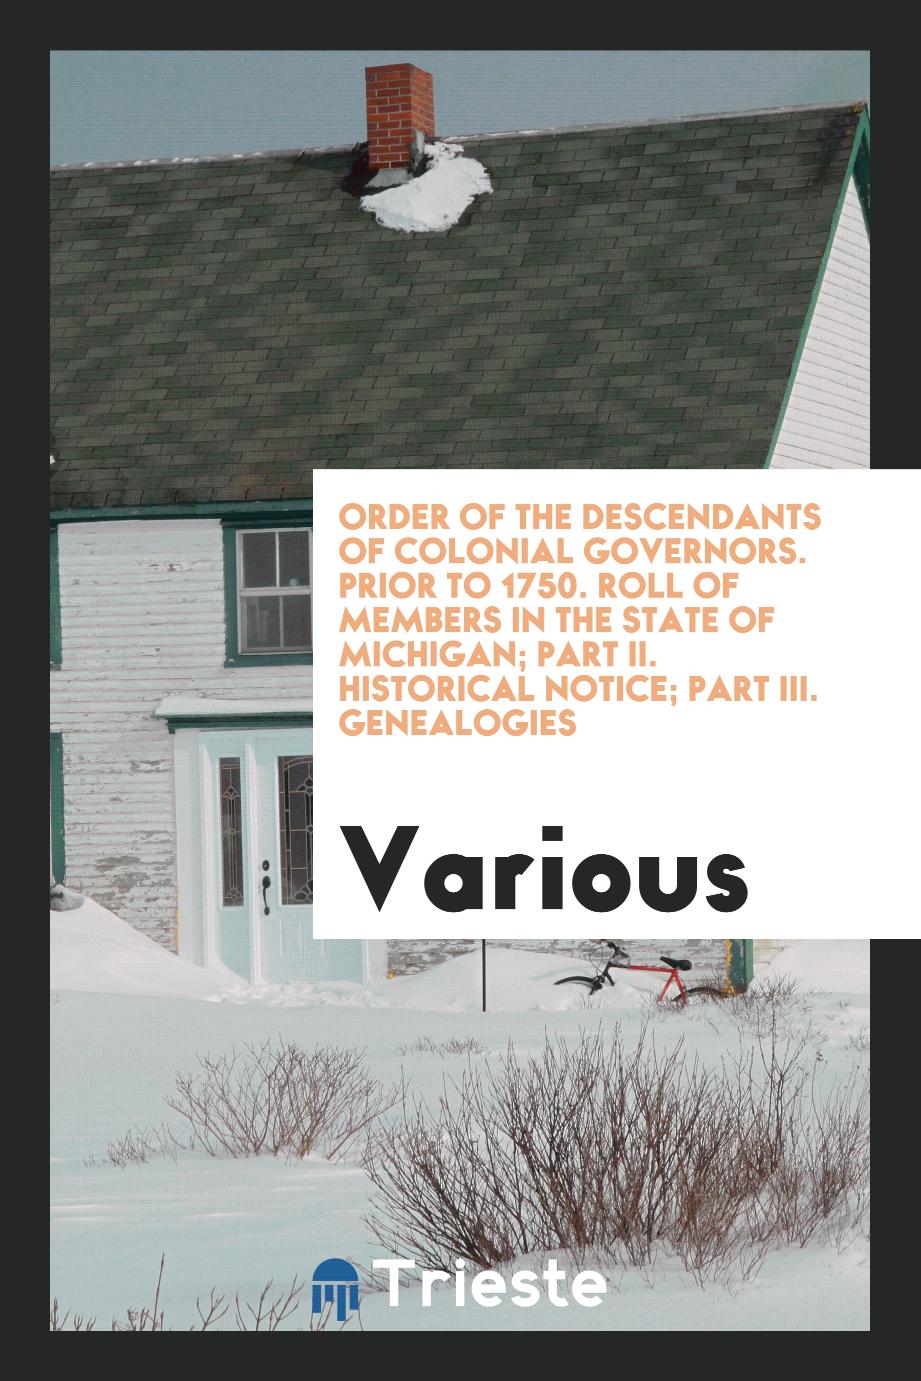 Order of the descendants of colonial governors. Prior to 1750. Roll of members in the state of Michigan; Part II. Historical notice; Part III. Genealogies